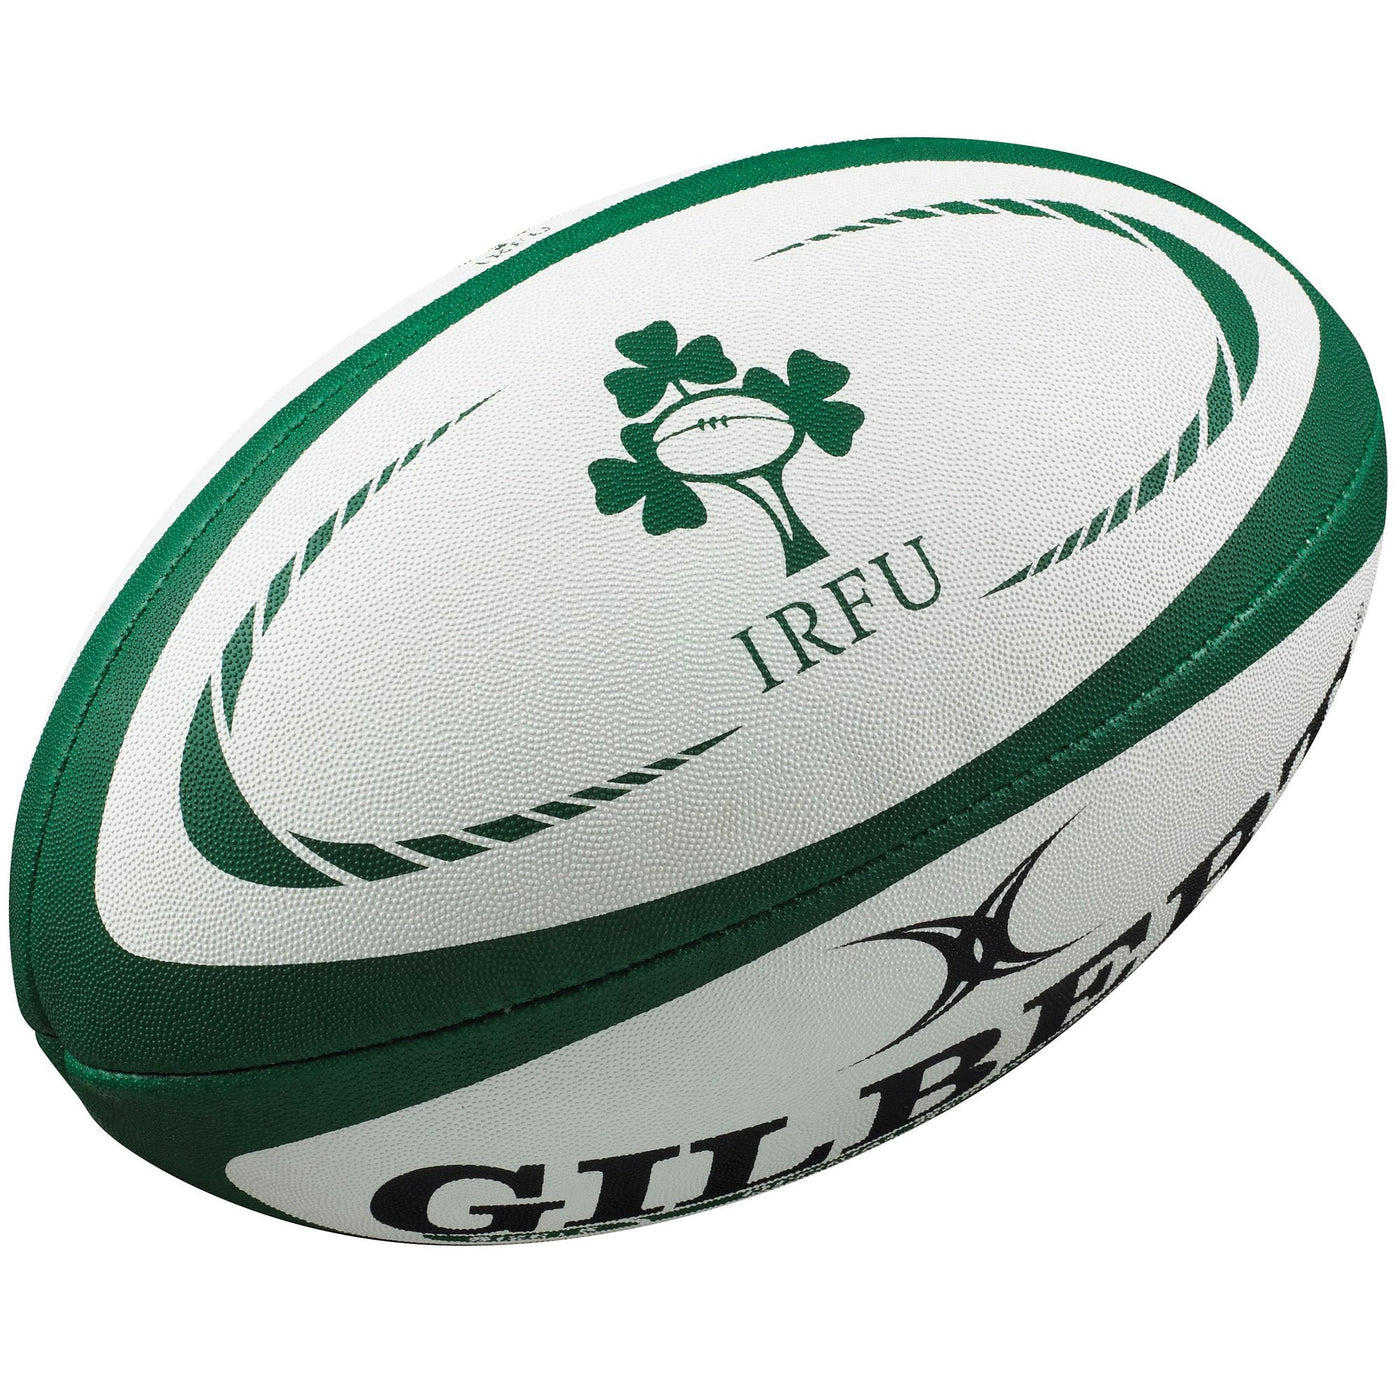 Ireland Replica Rugby Ball Size 4